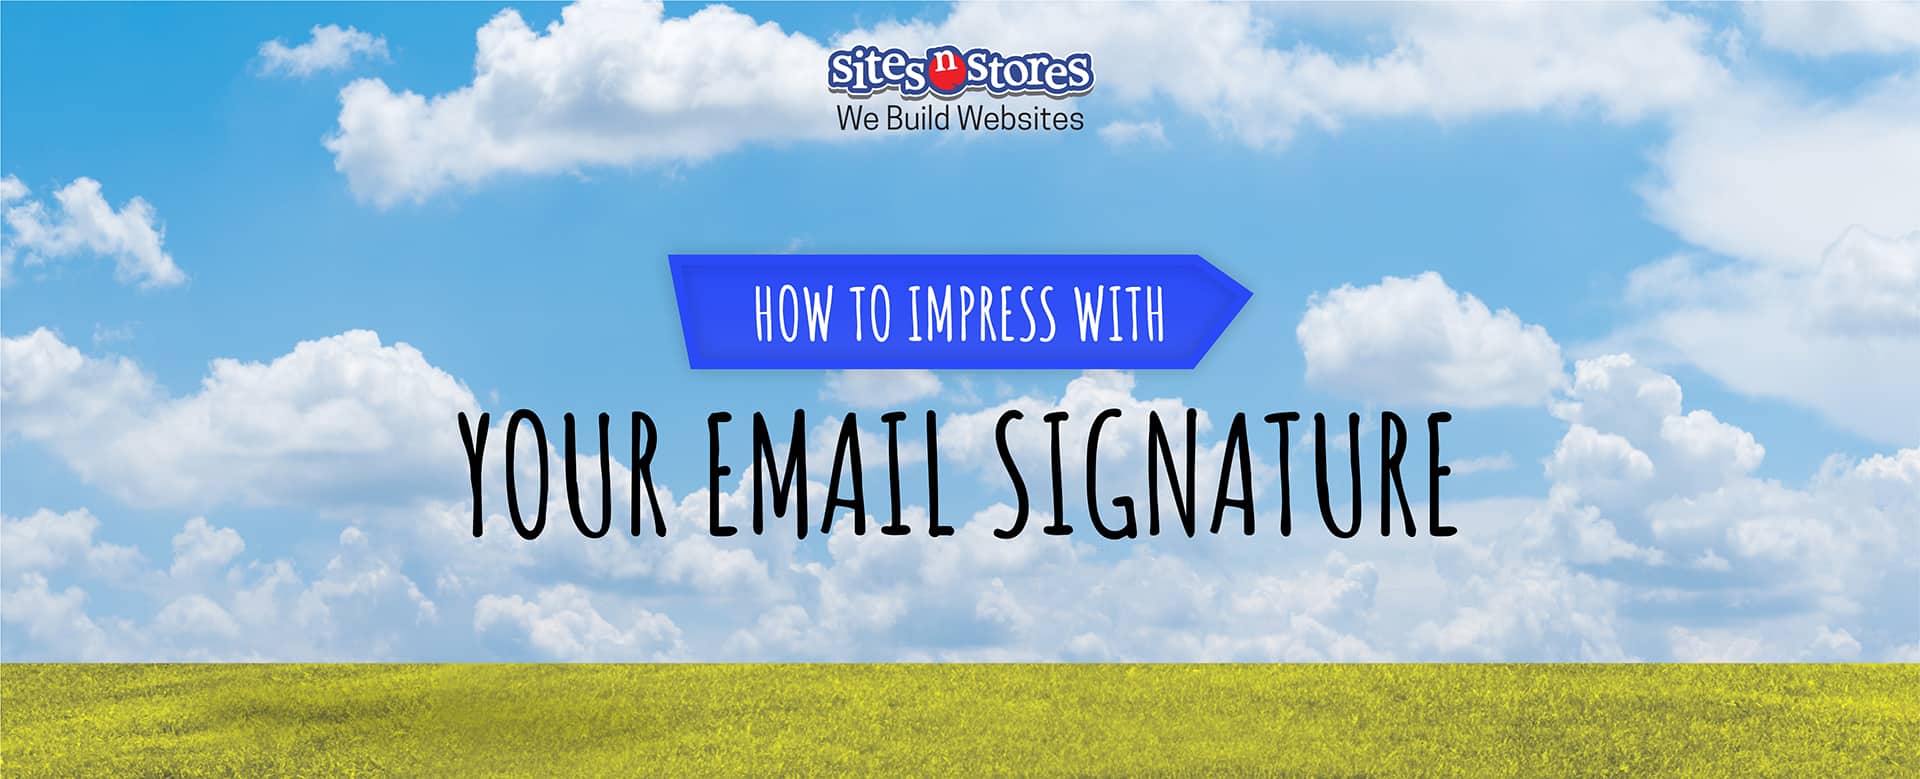 How to Impress with Your Email Signature